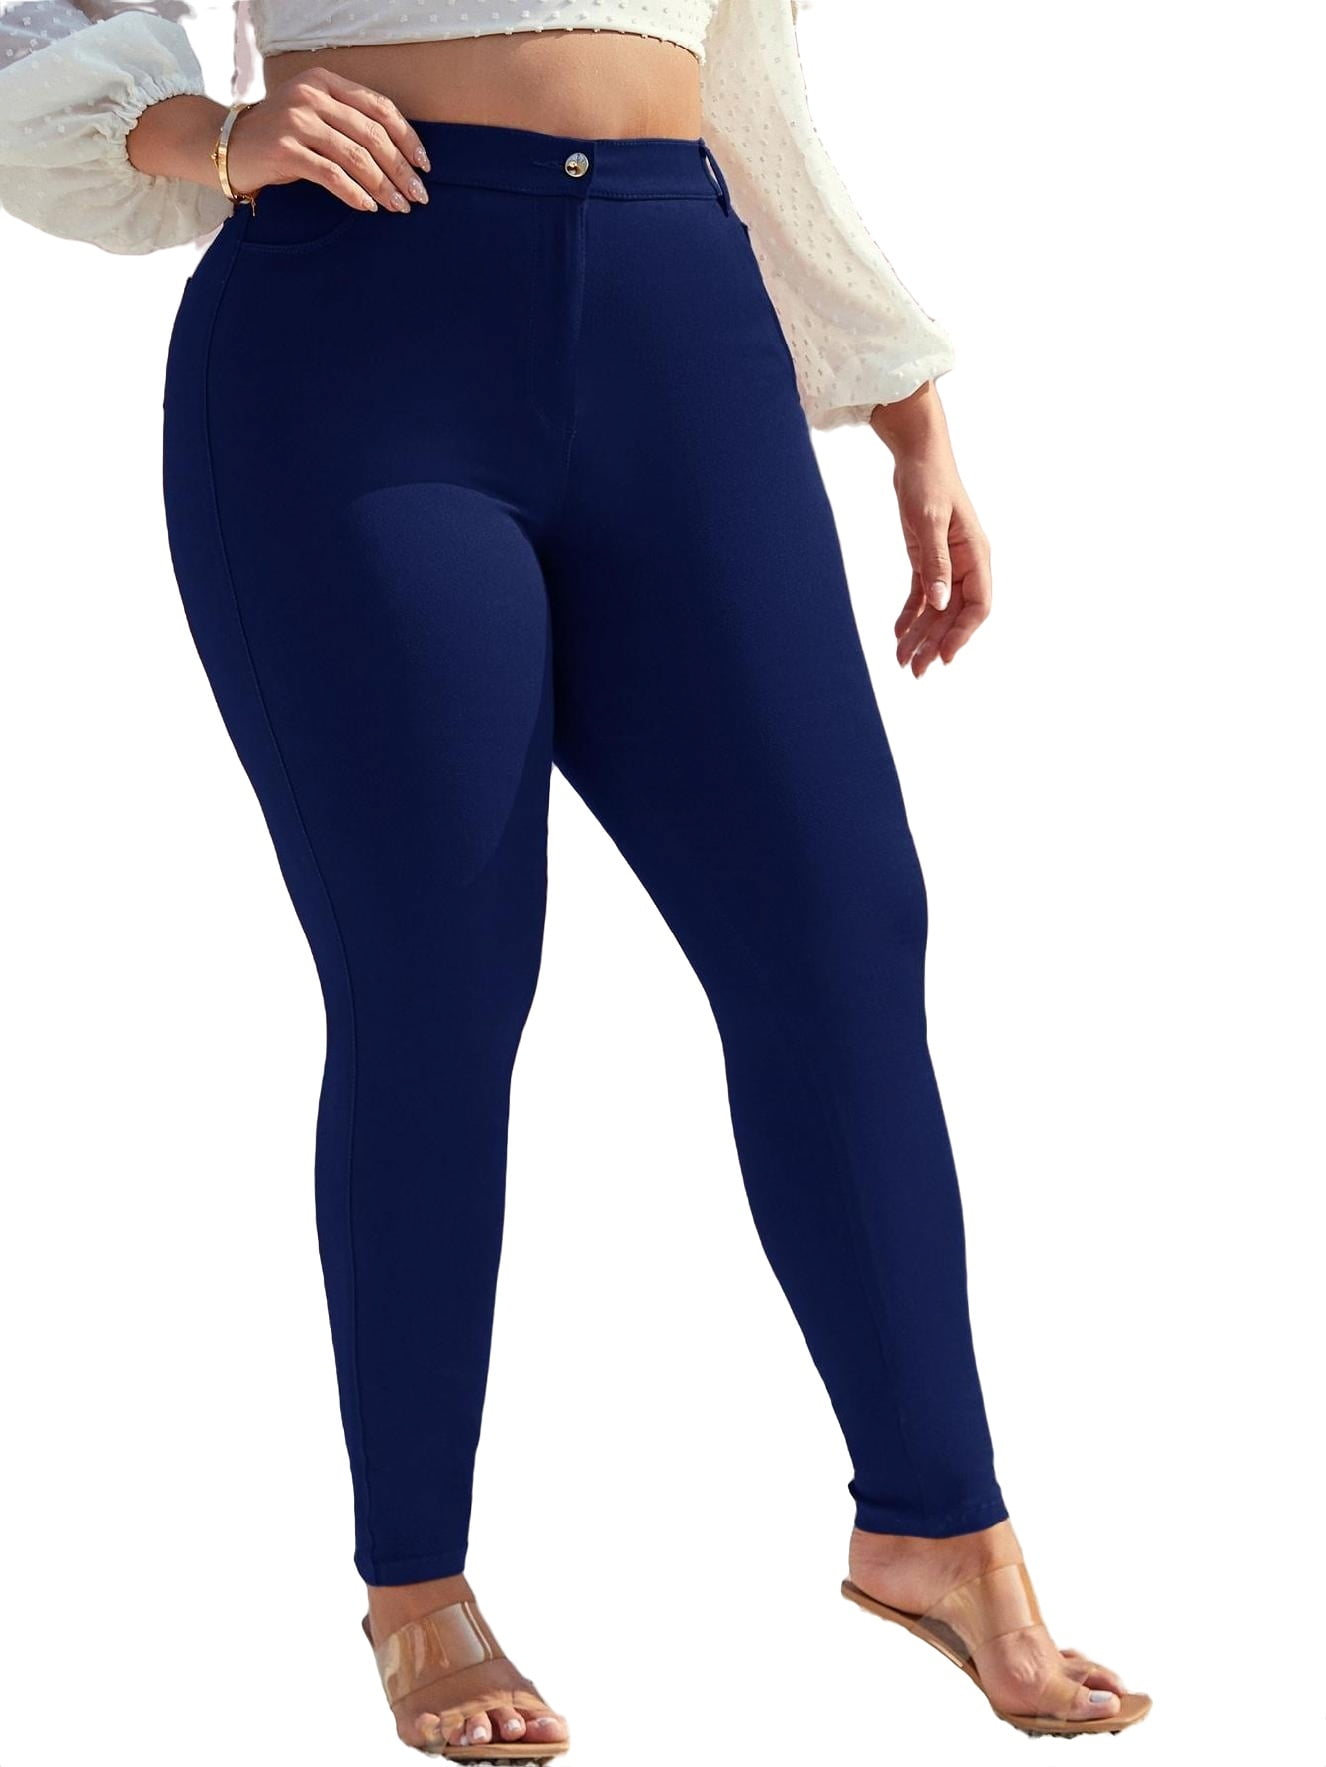 Casual Solid Skinny Royal Blue Plus Size Pants (Women's)